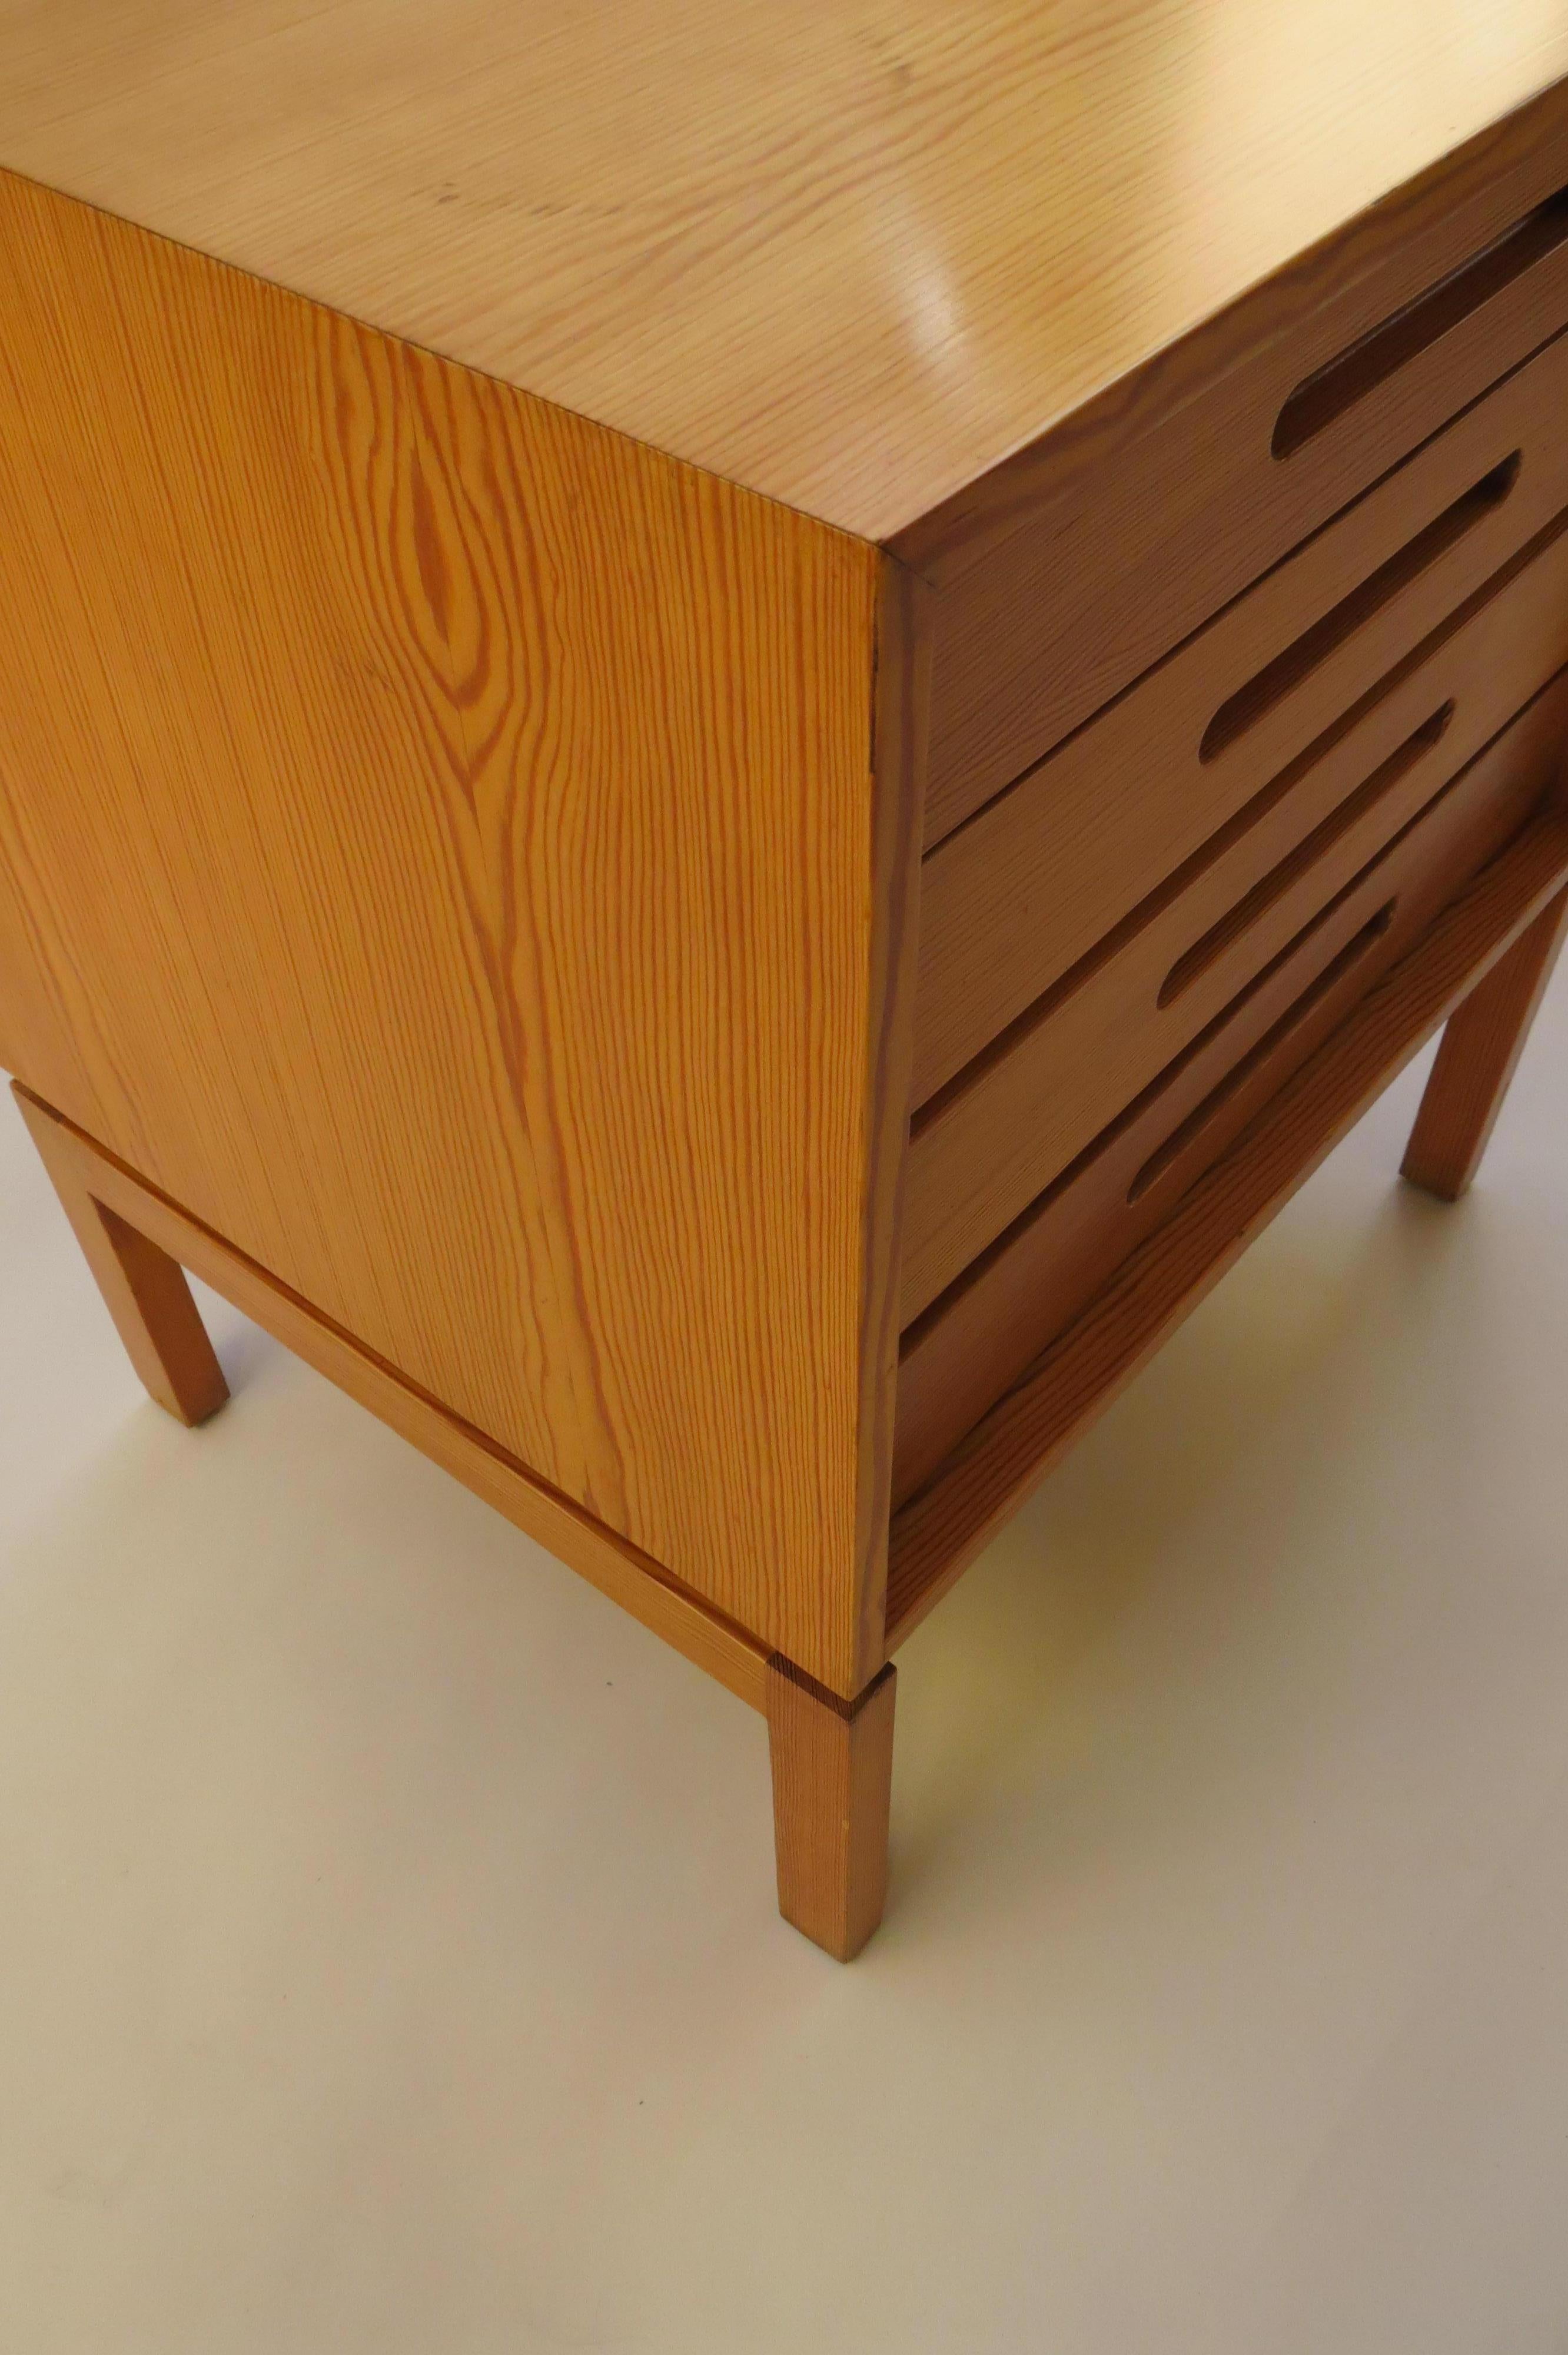 20th Century Midcentury Modern Design Oregon Pine Small Chest of Drawers 1970s